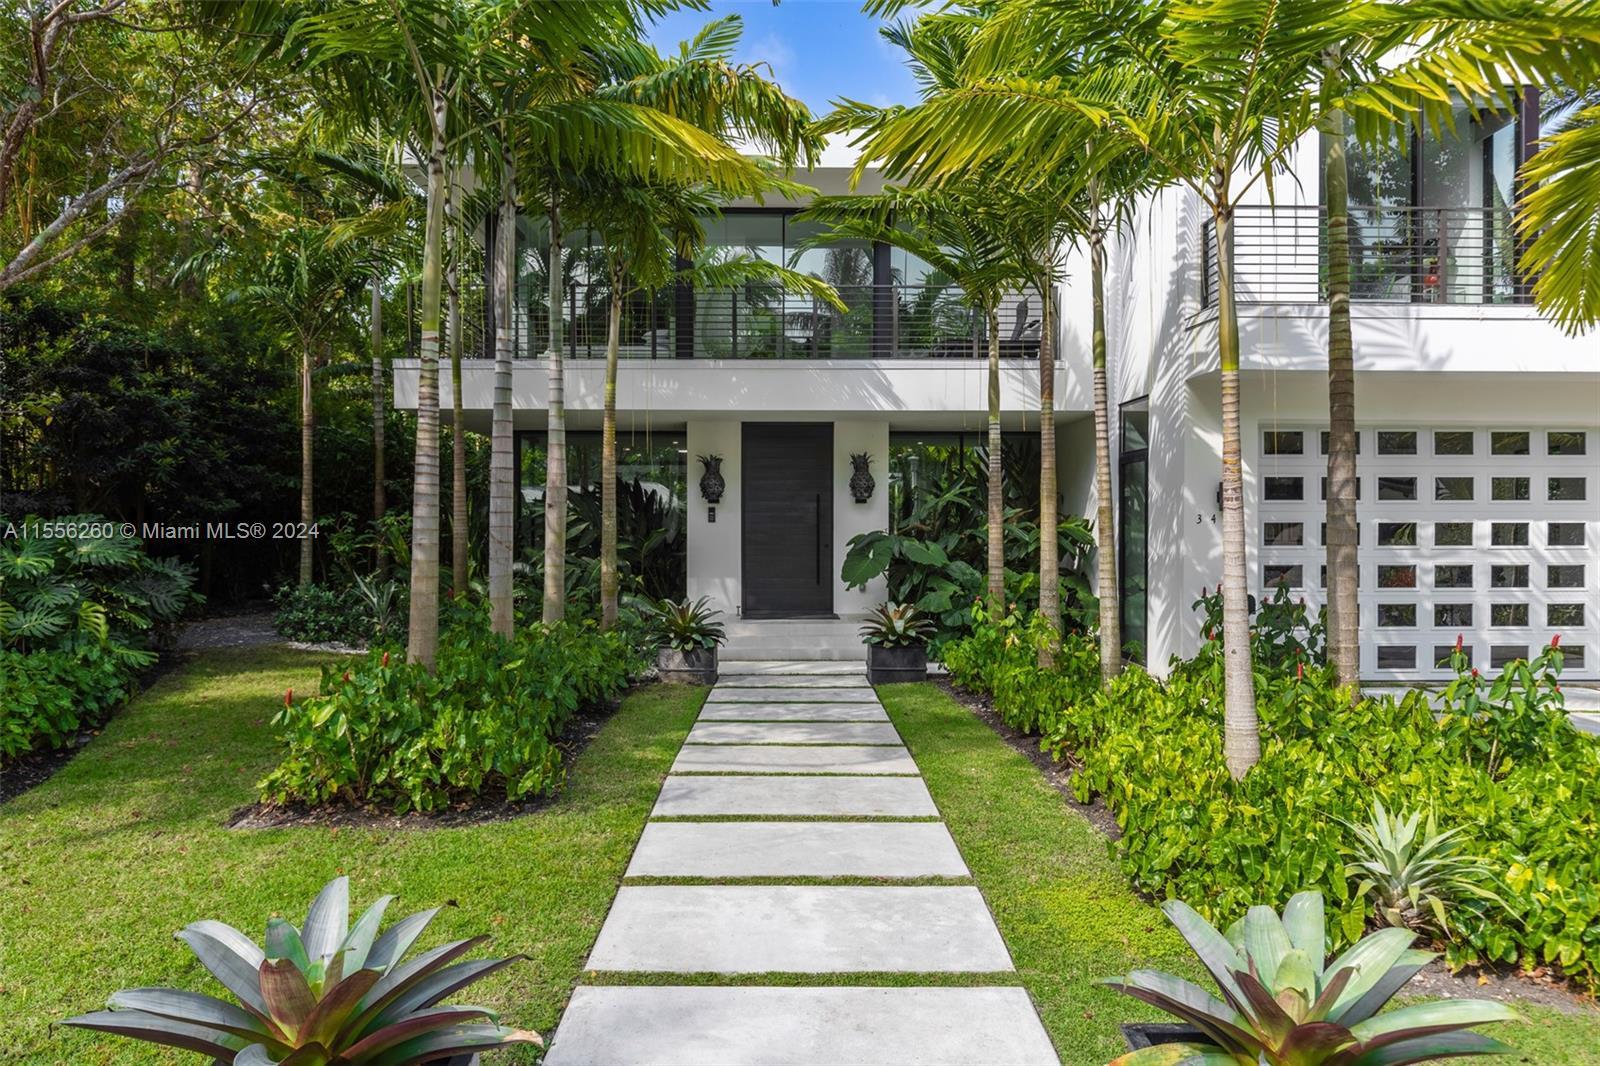 Stunning tropical modern home in the coveted guard-gated community of Four-Way Lodge Estates. Walk t